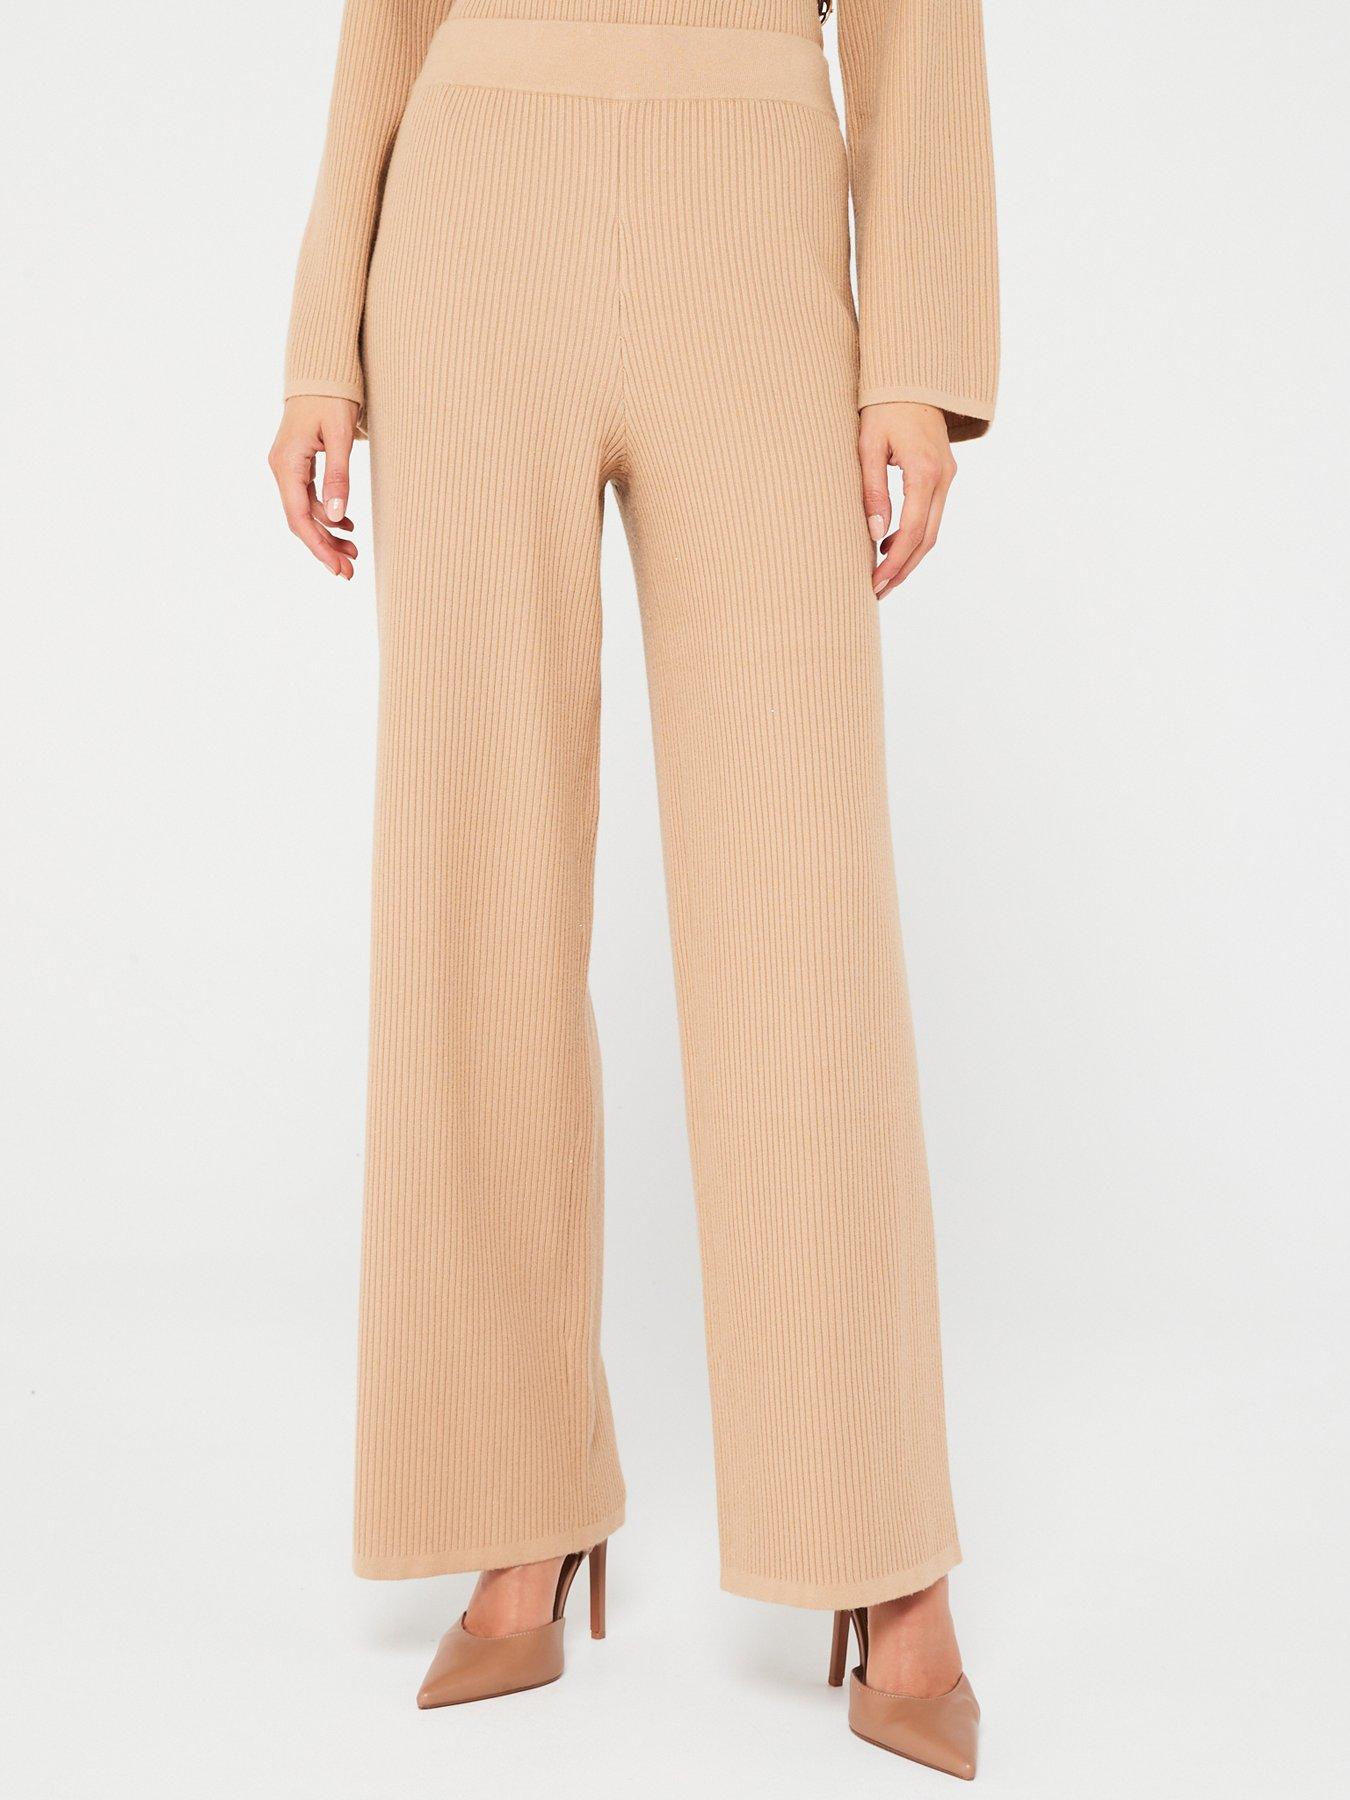 Knitted trousers, LONG TROUSERS, TROUSERS, SALE